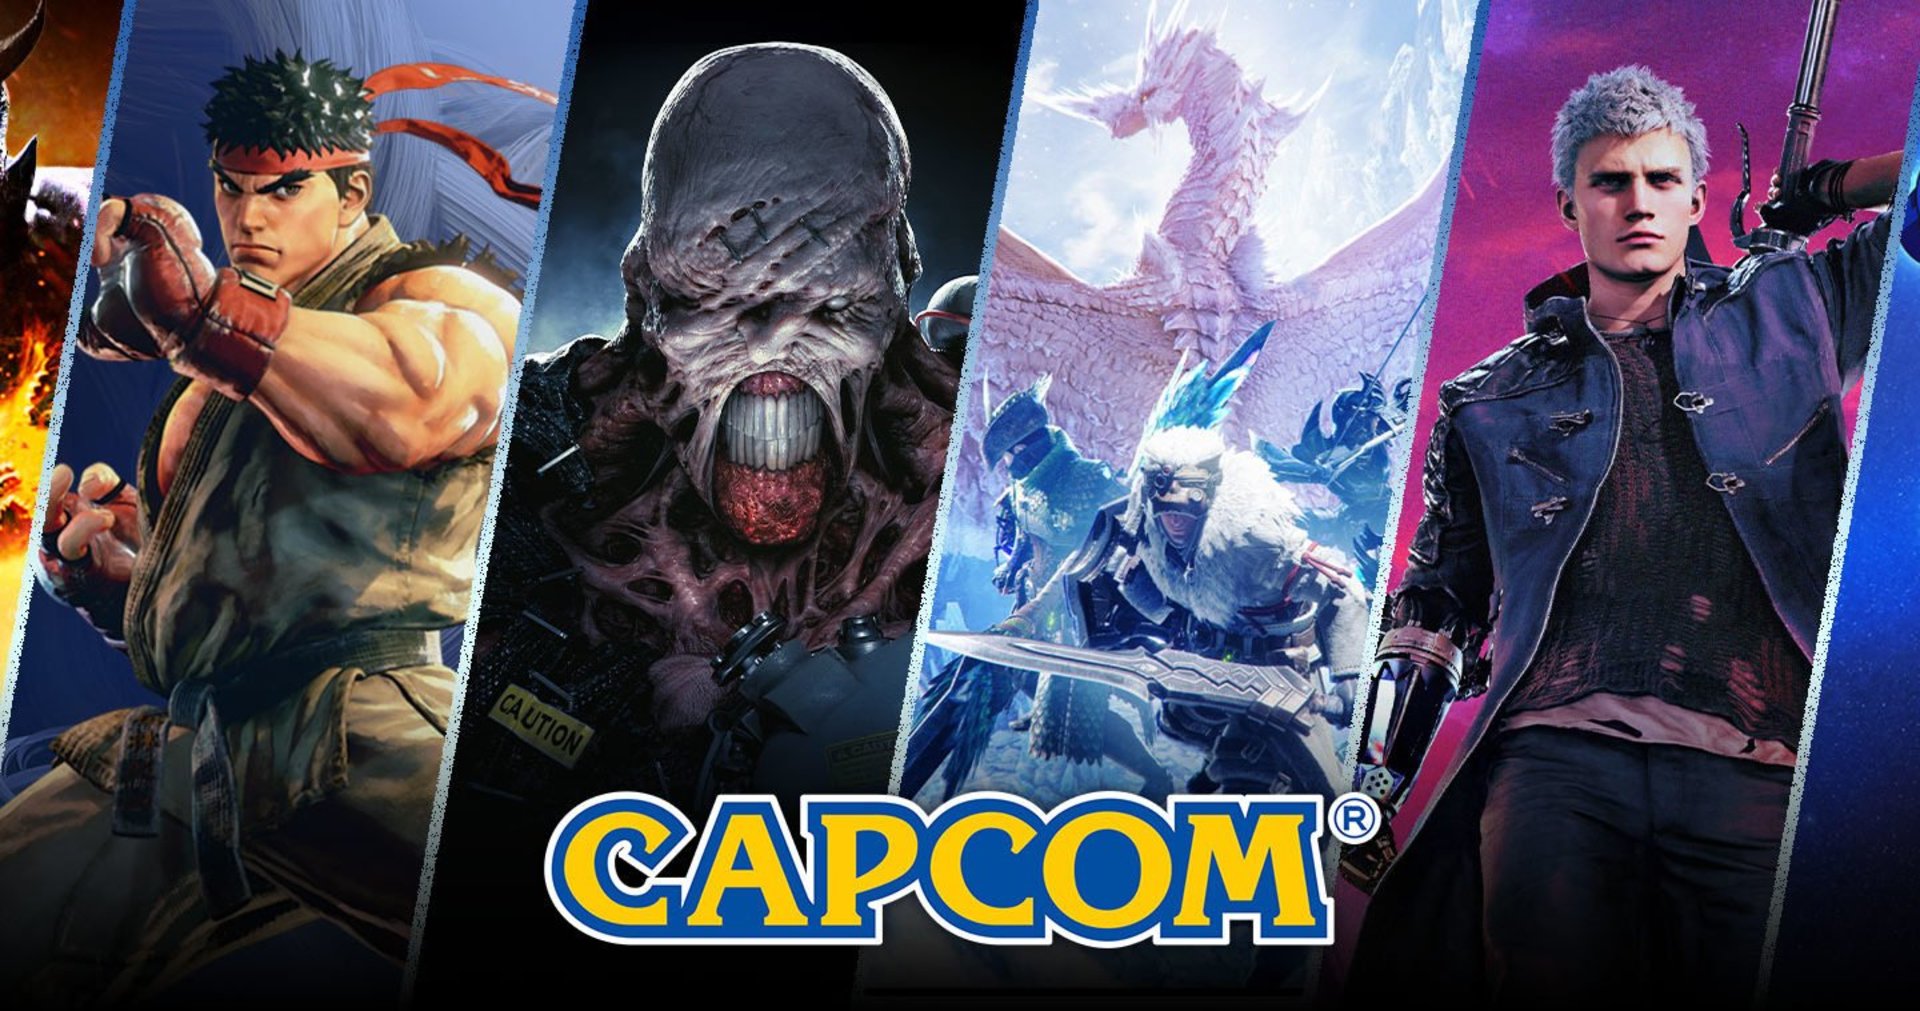 Capcom games in Steam increased in price several times in Kazakhstan and Turkey